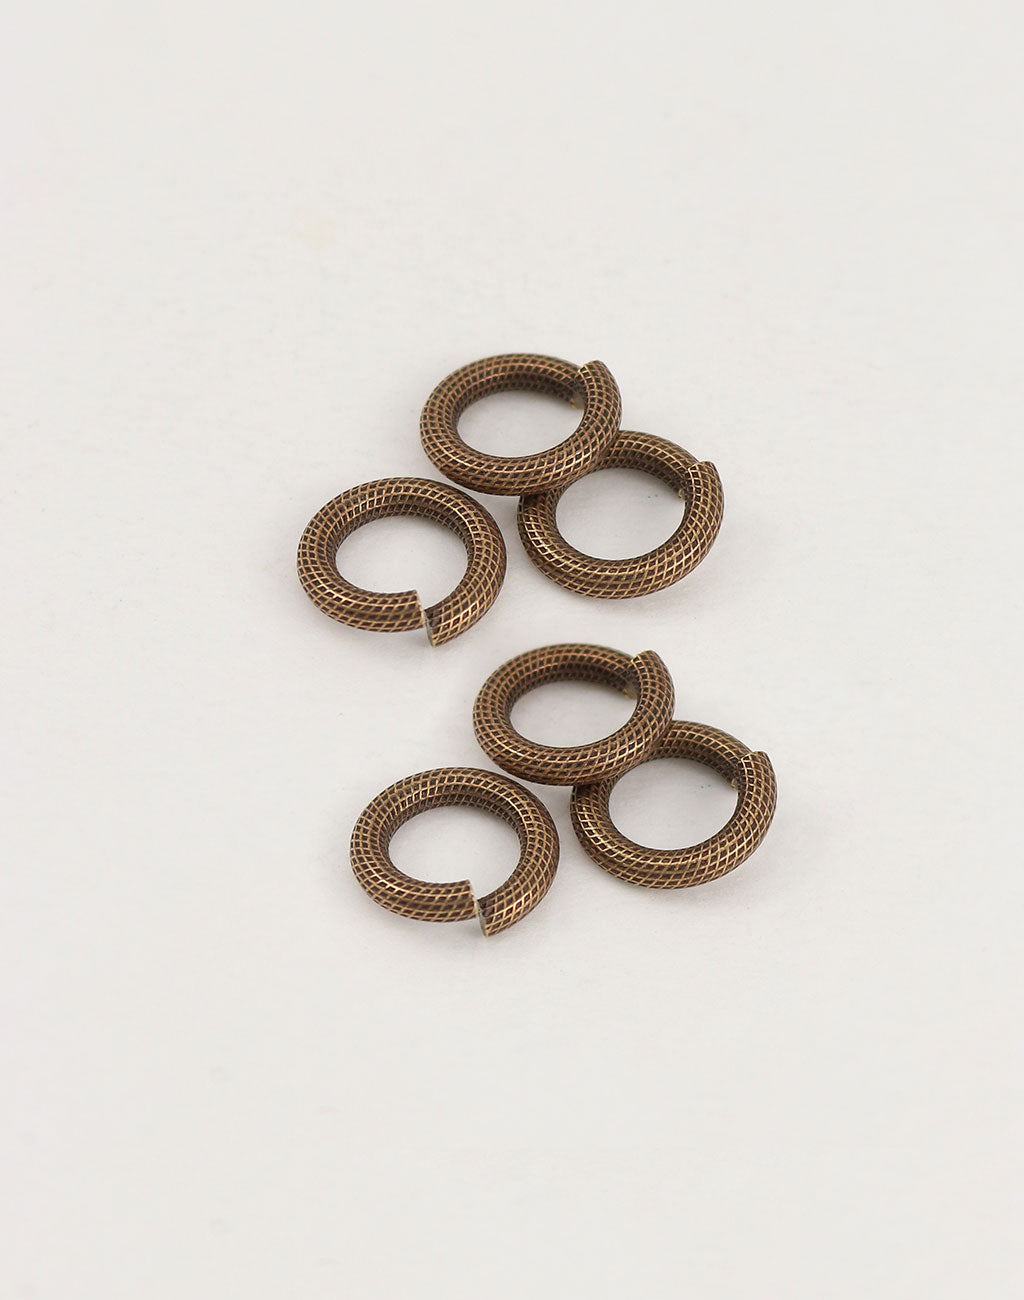 Heavy Jump Rings, 15 mm, 15 gauge, 02829, brass ox finish, B'sue Boutiques,  Jewelry Supplies, extra large jump rings, thick jump rings, purse